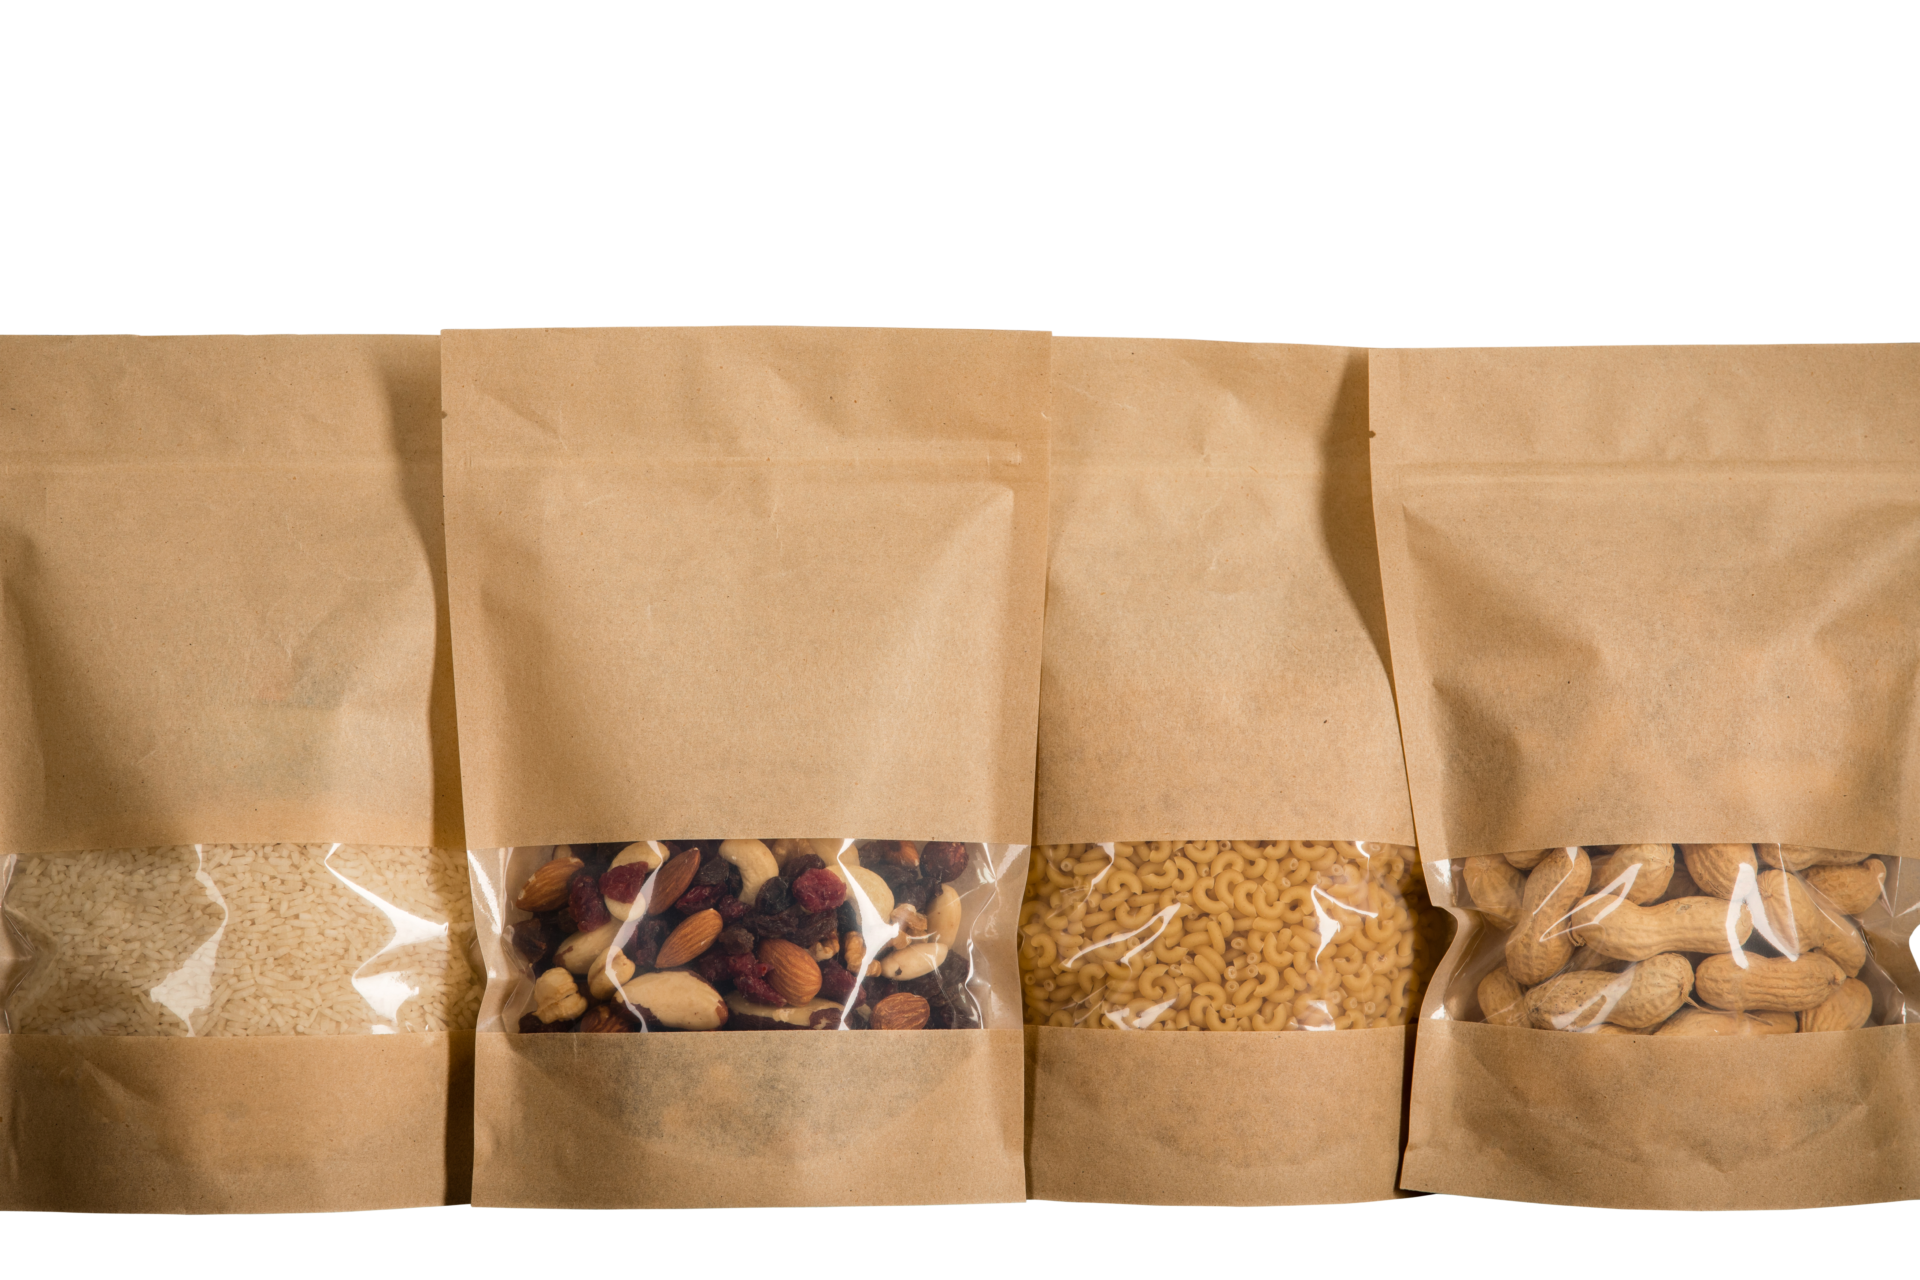 wp content uploads  0   0   eco friendly paper board pouch barrier bag food nuts seeds packaging 4c